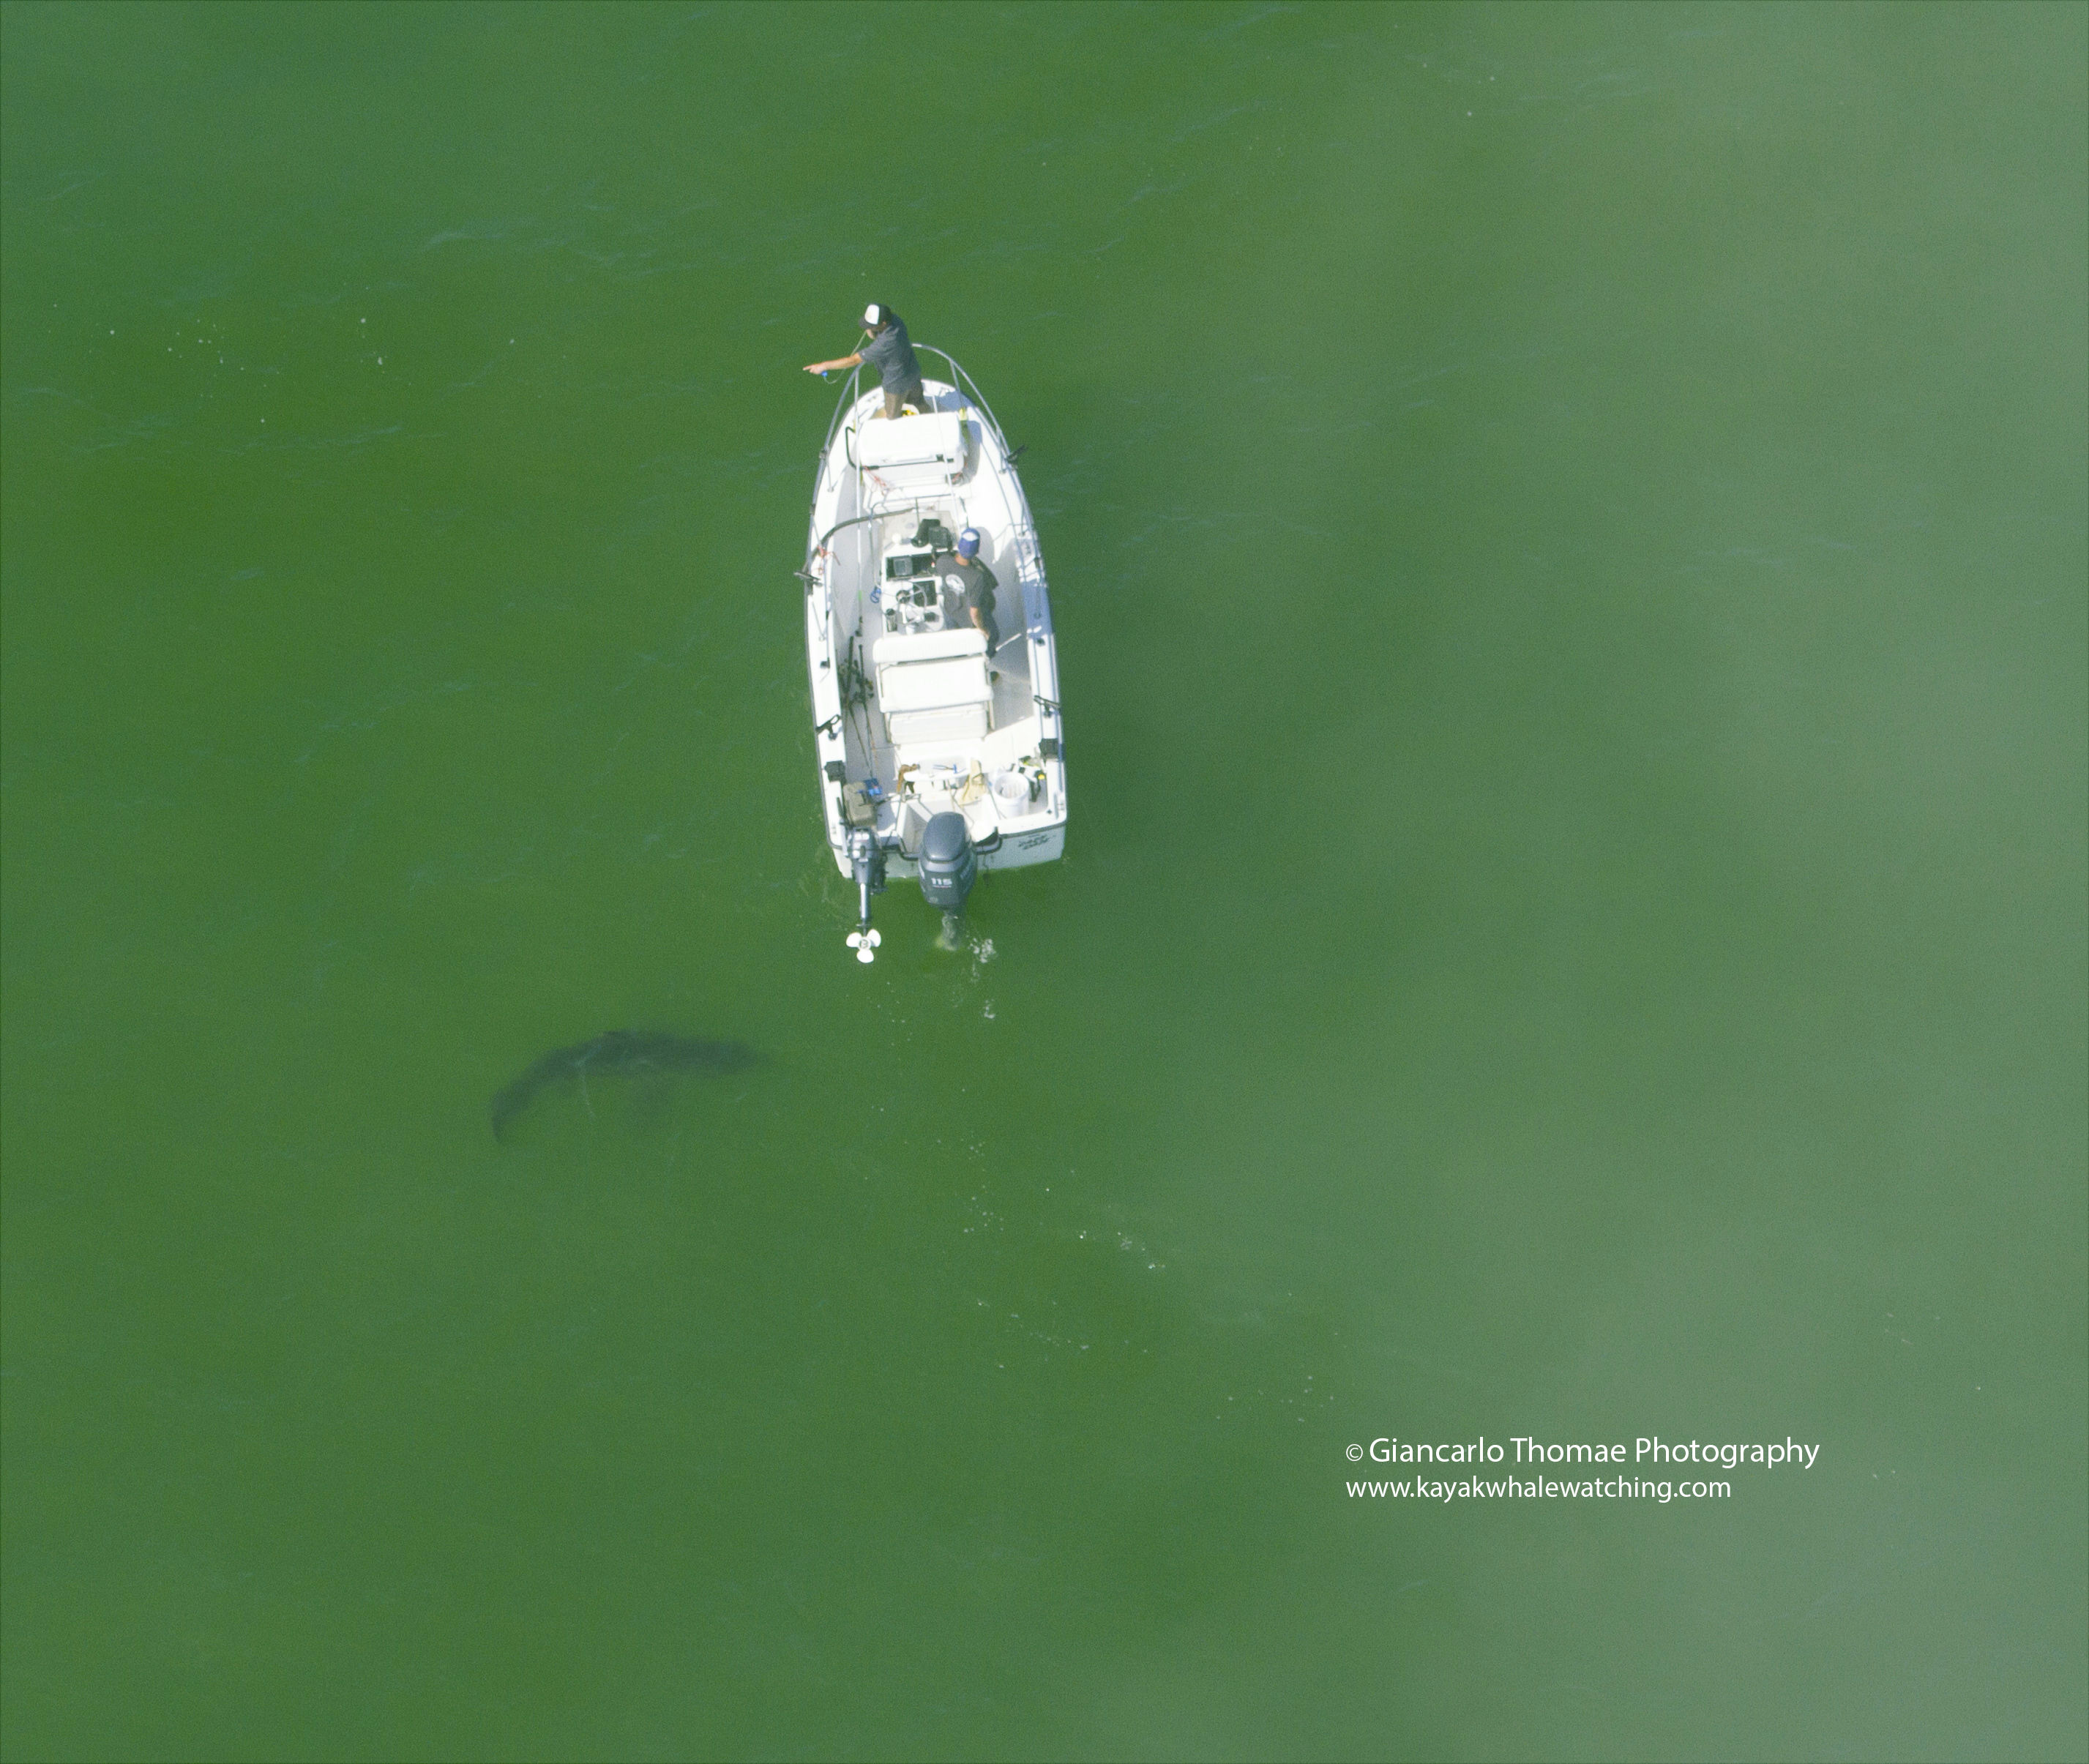 Images of an estimated 15 great white sharks were captured near Aptos on June 25th. (Photo: Giancarlo Thomae Photography)